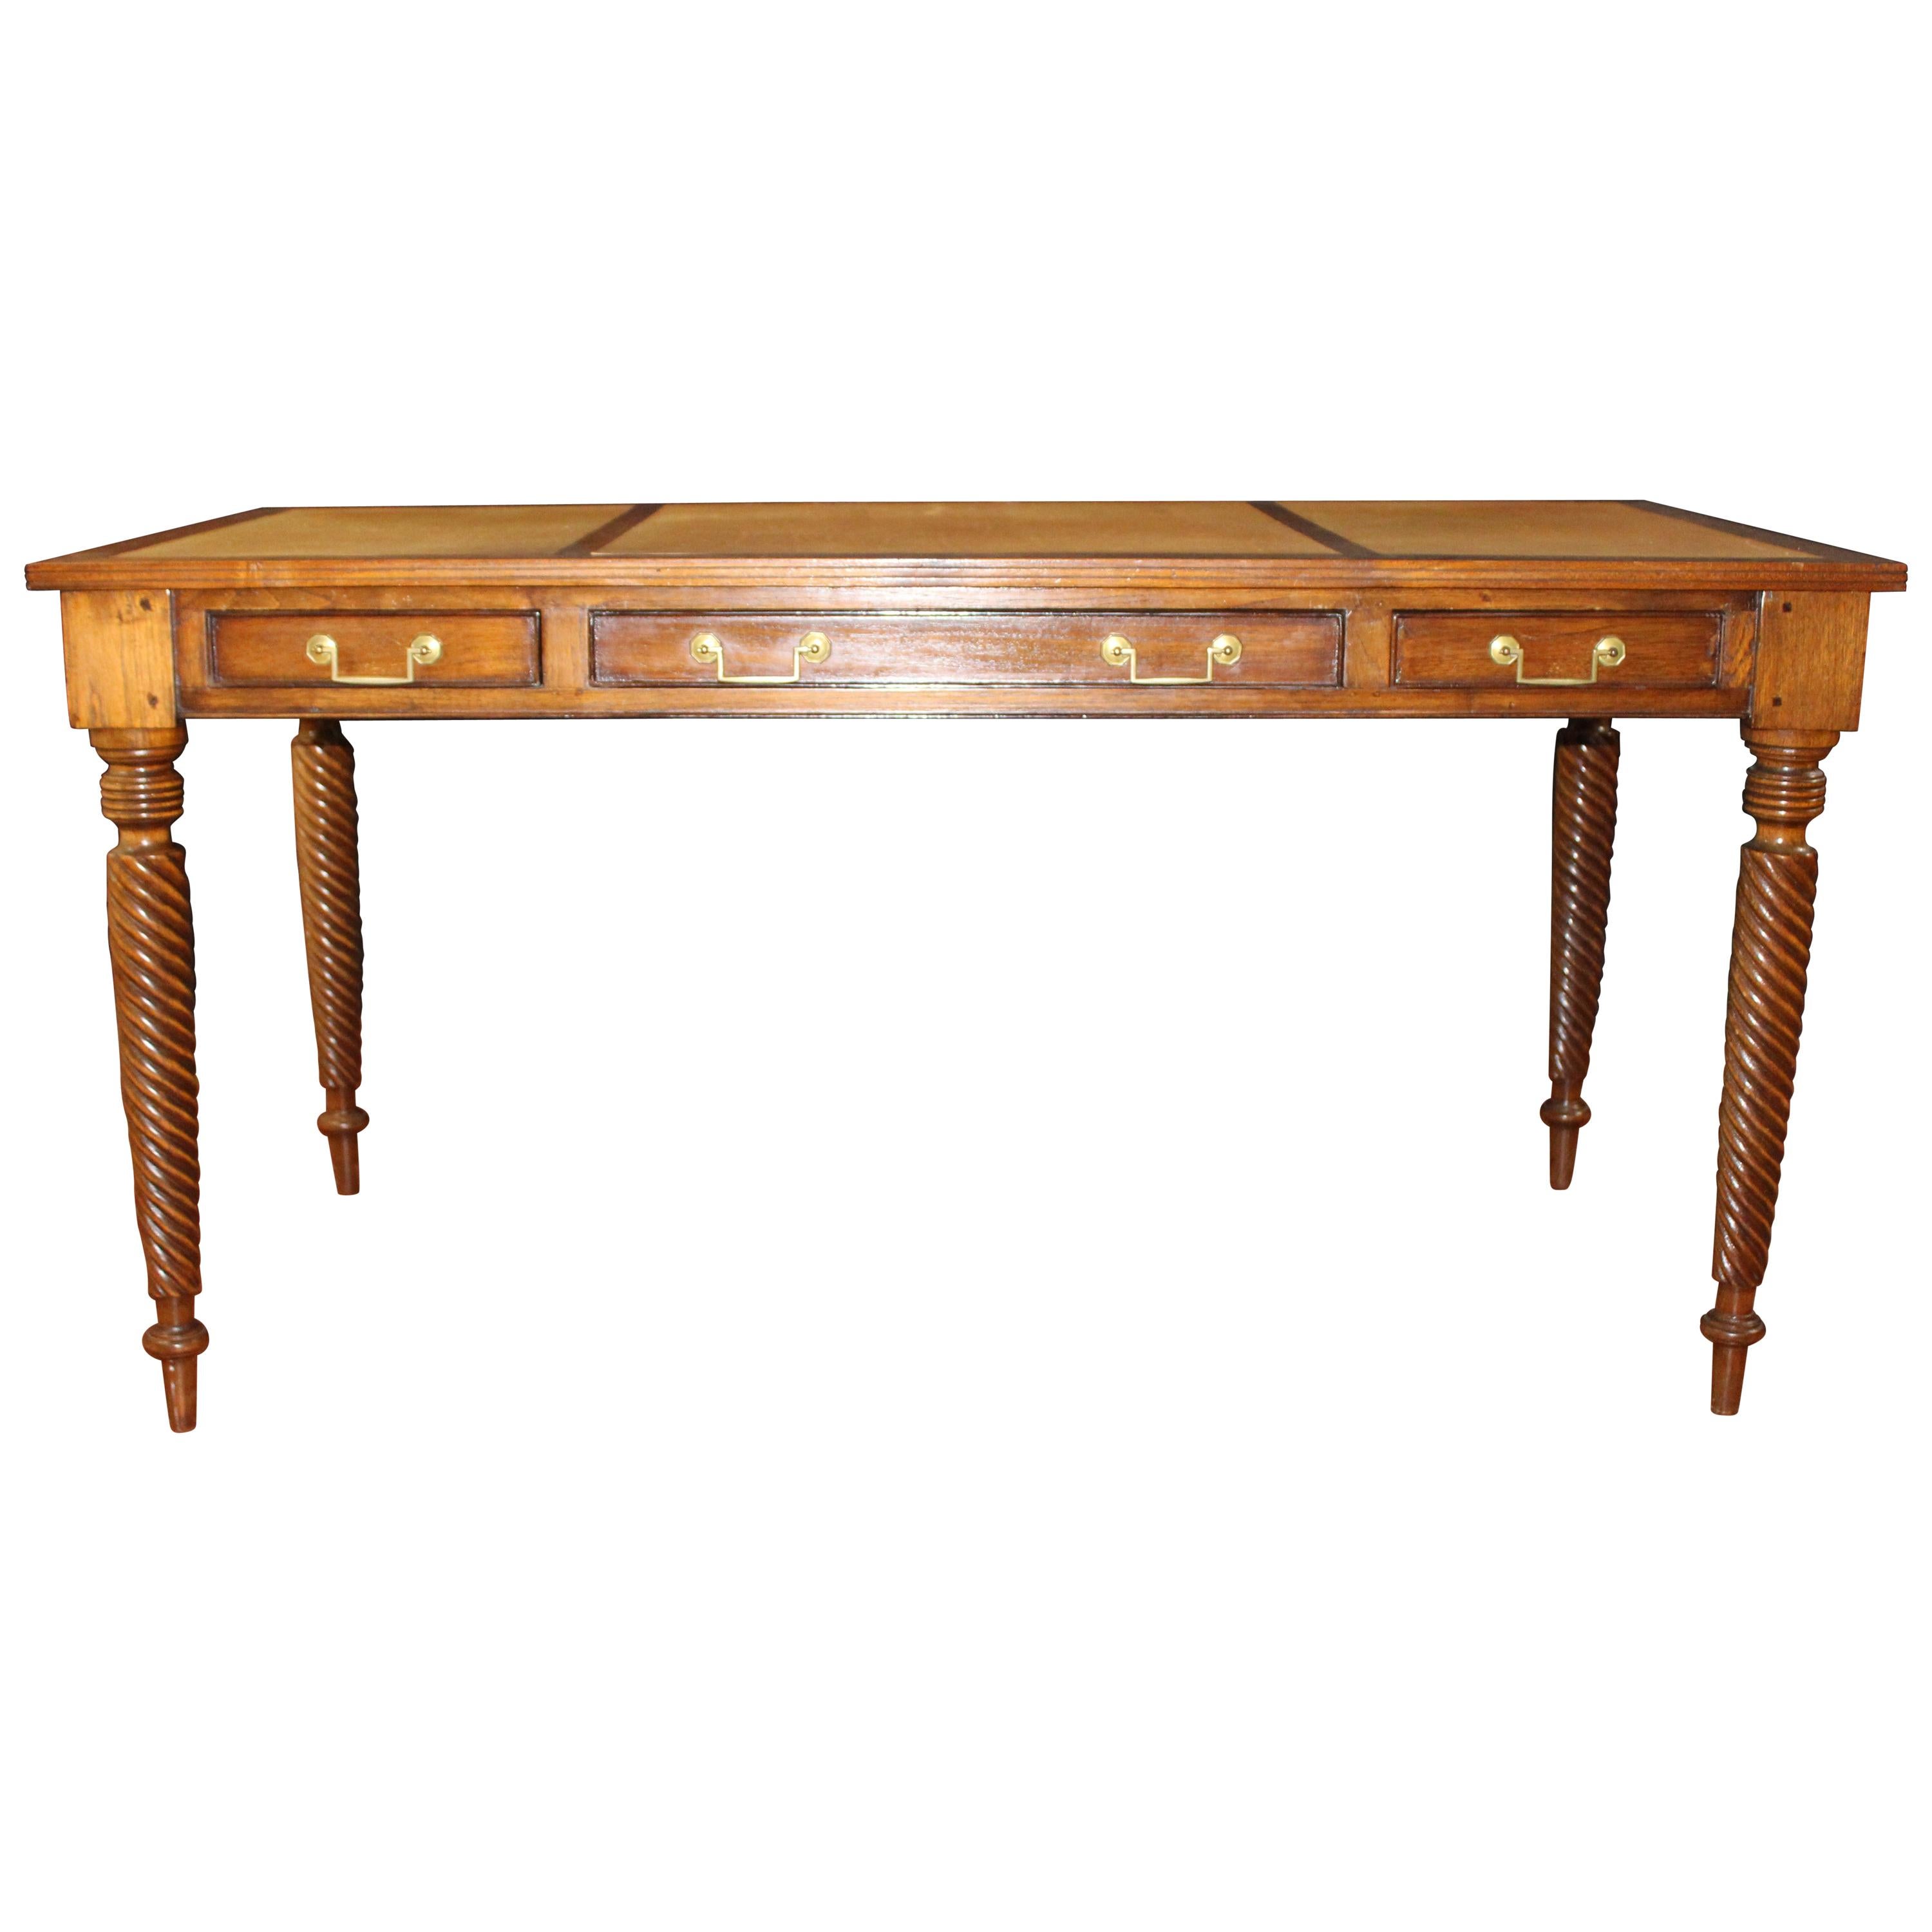 Leather In-Laid 3 Drawer Blonde Mahogany Desk with Brass Hardware